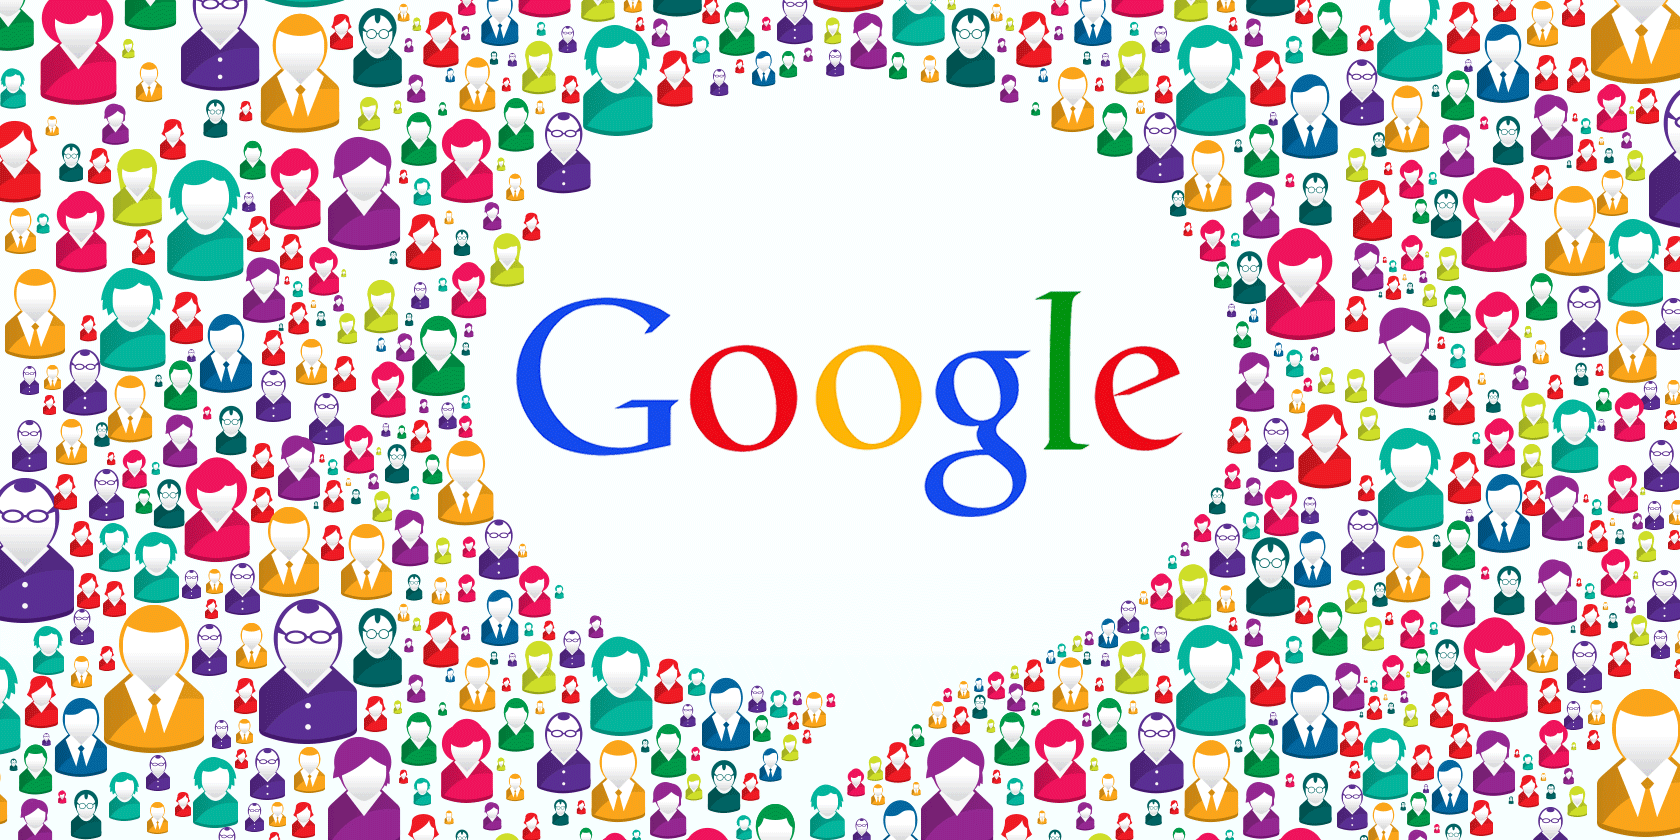 7 Google Crowdsourcing Projects That Help Us Today